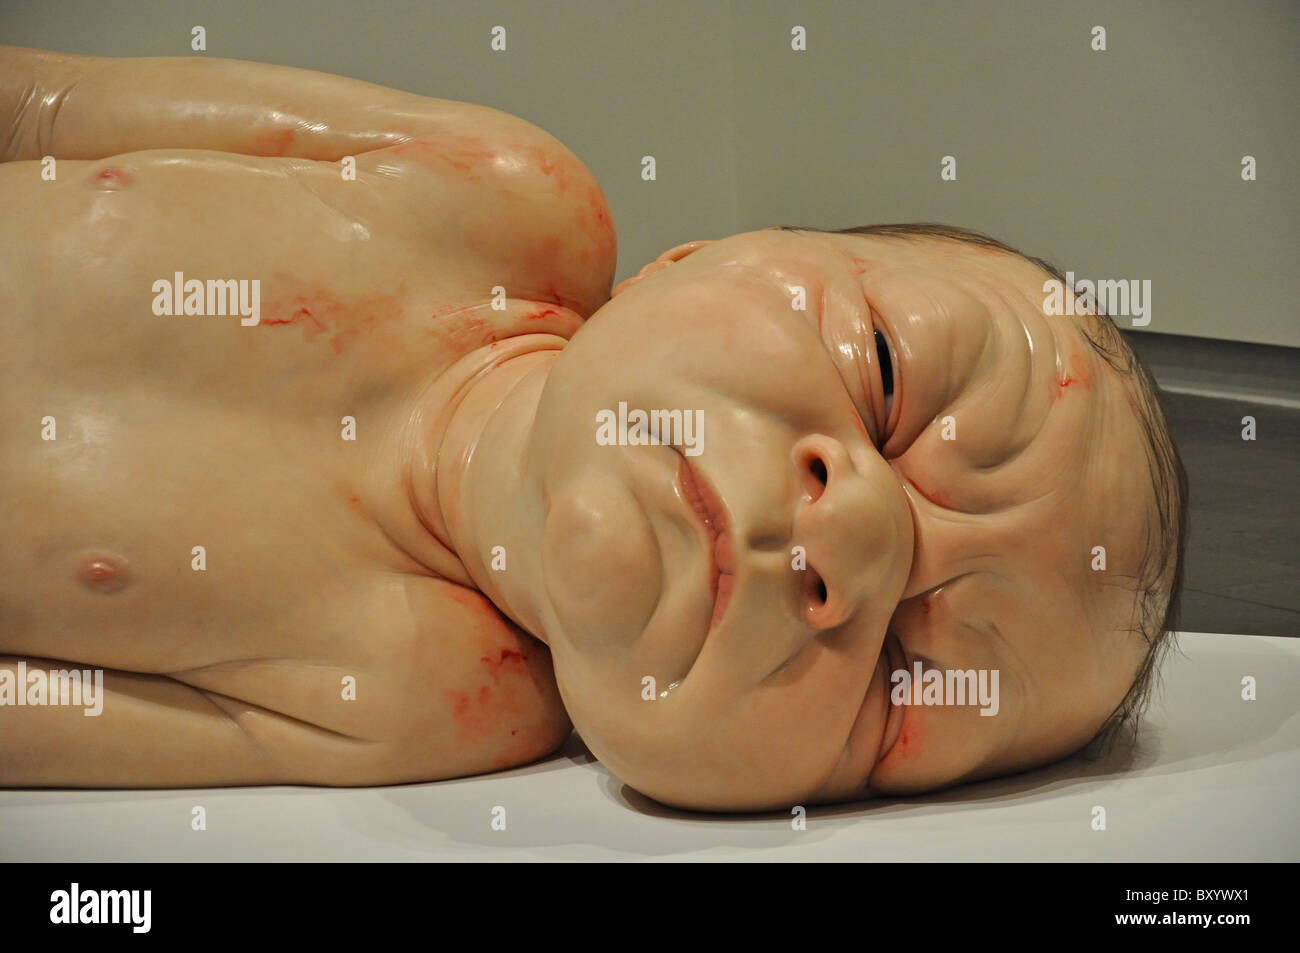 Newborn baby sculpture at Ron Mueck Exhibition, Christchurch Art Gallery, Christchurch, Canterbury, South Island, New Zealand Stock Photo